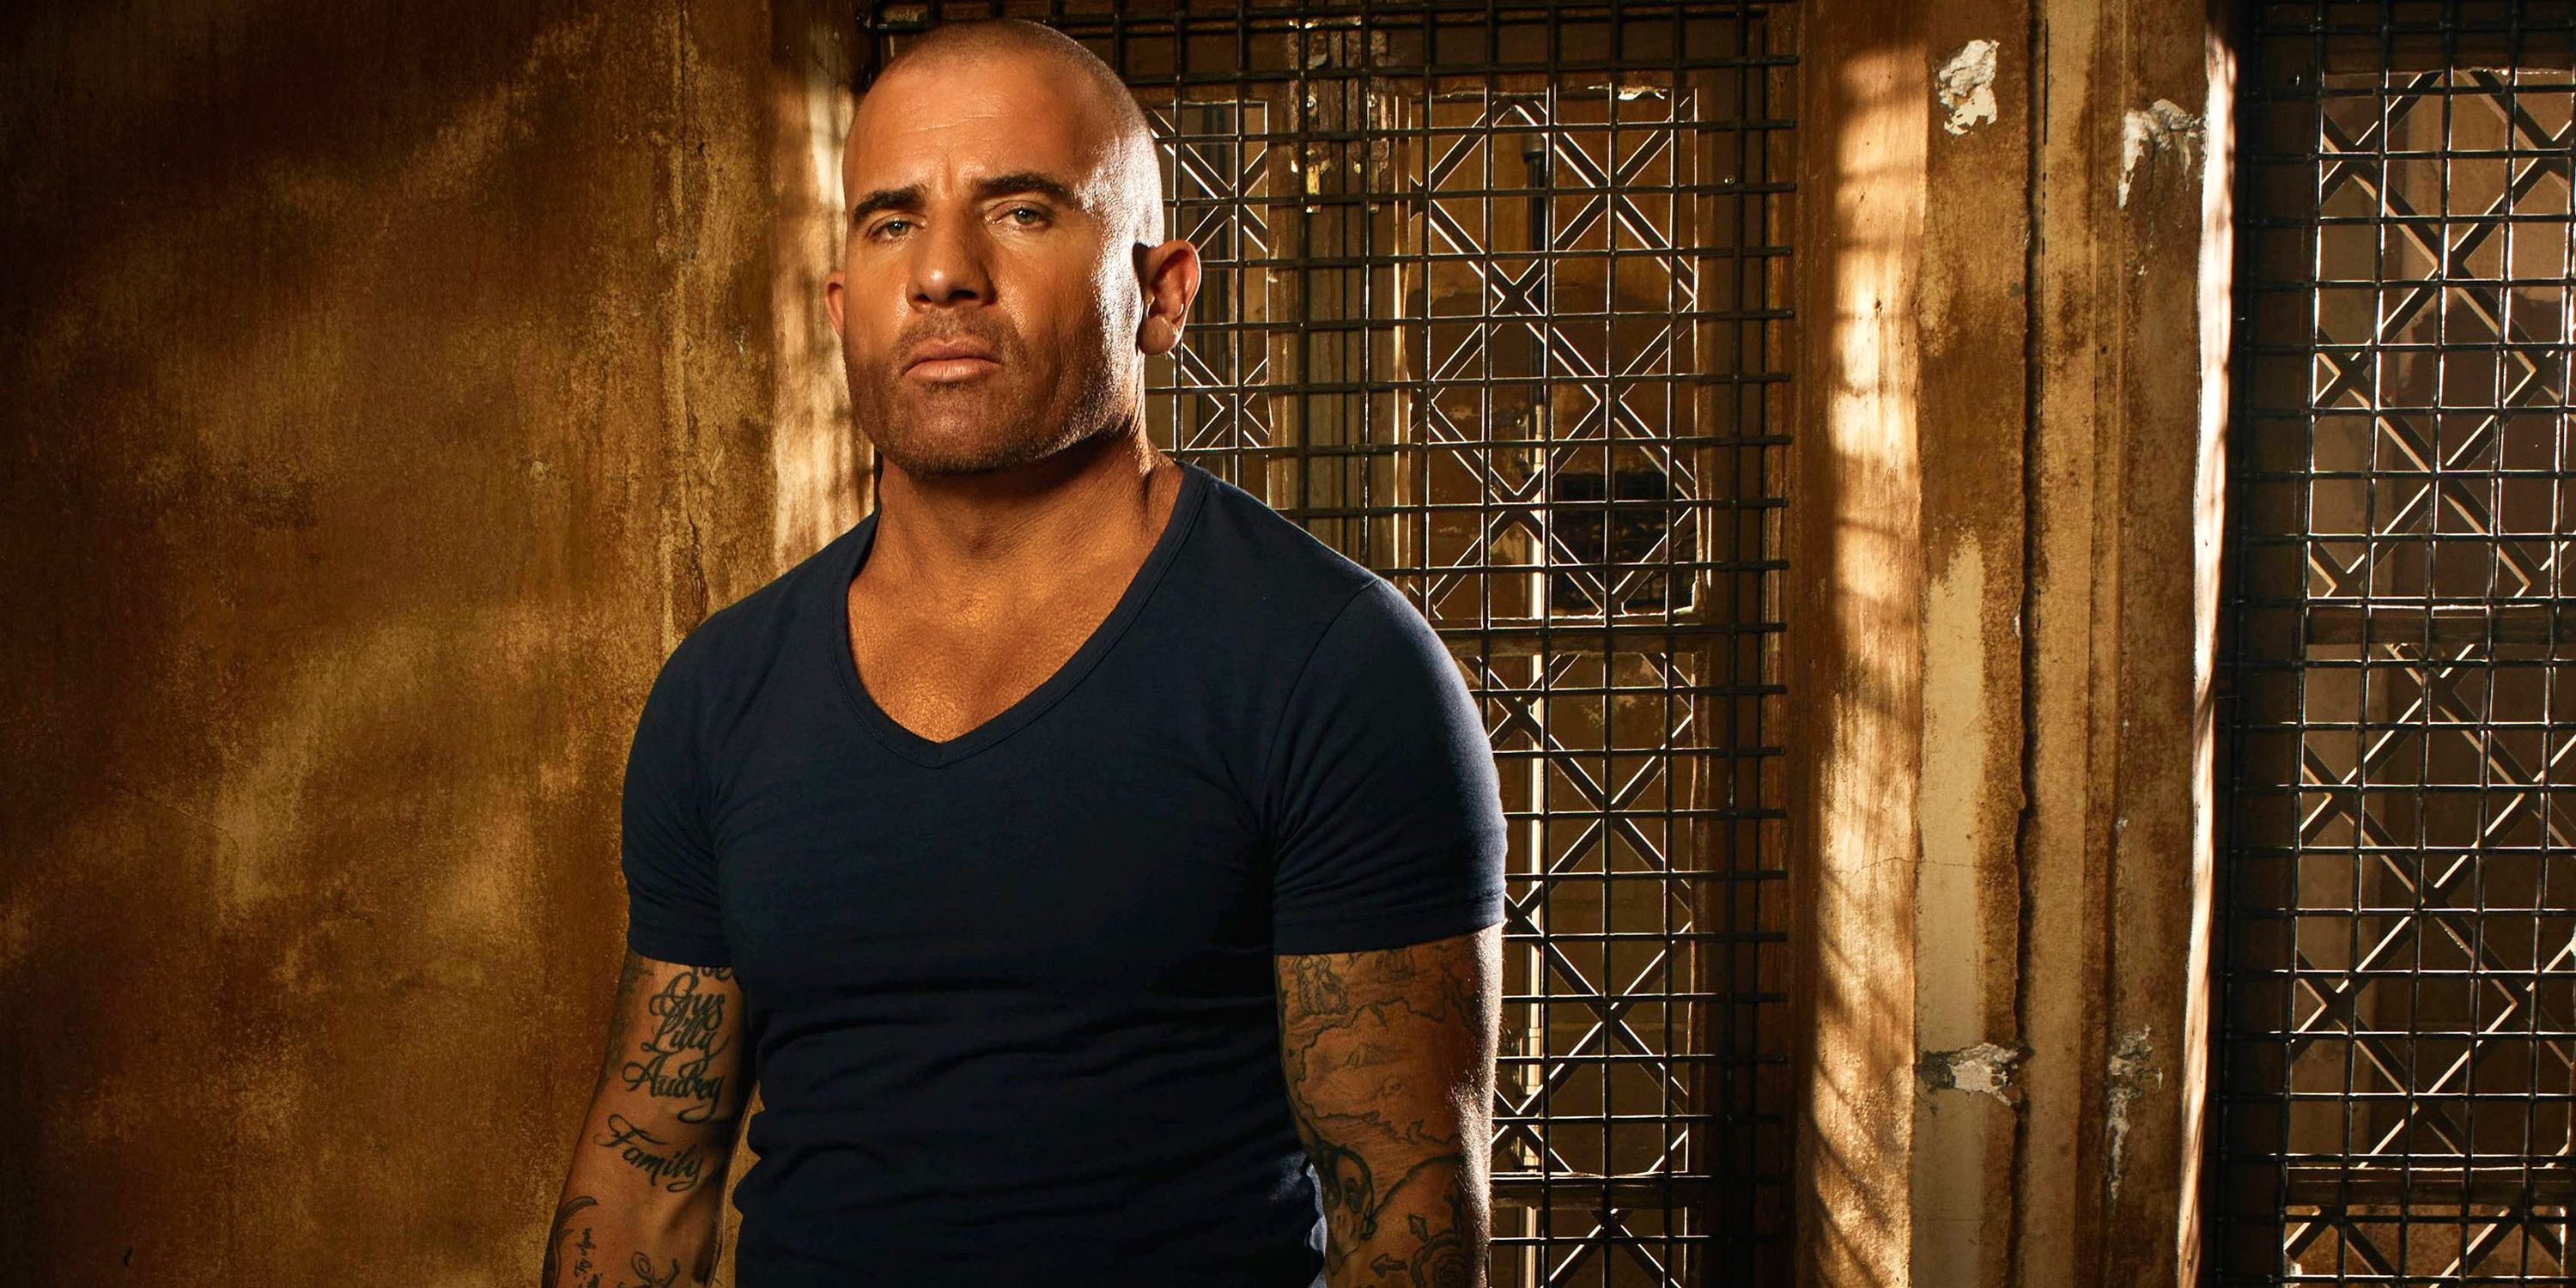 Lincoln Burrows stands in a jail cell